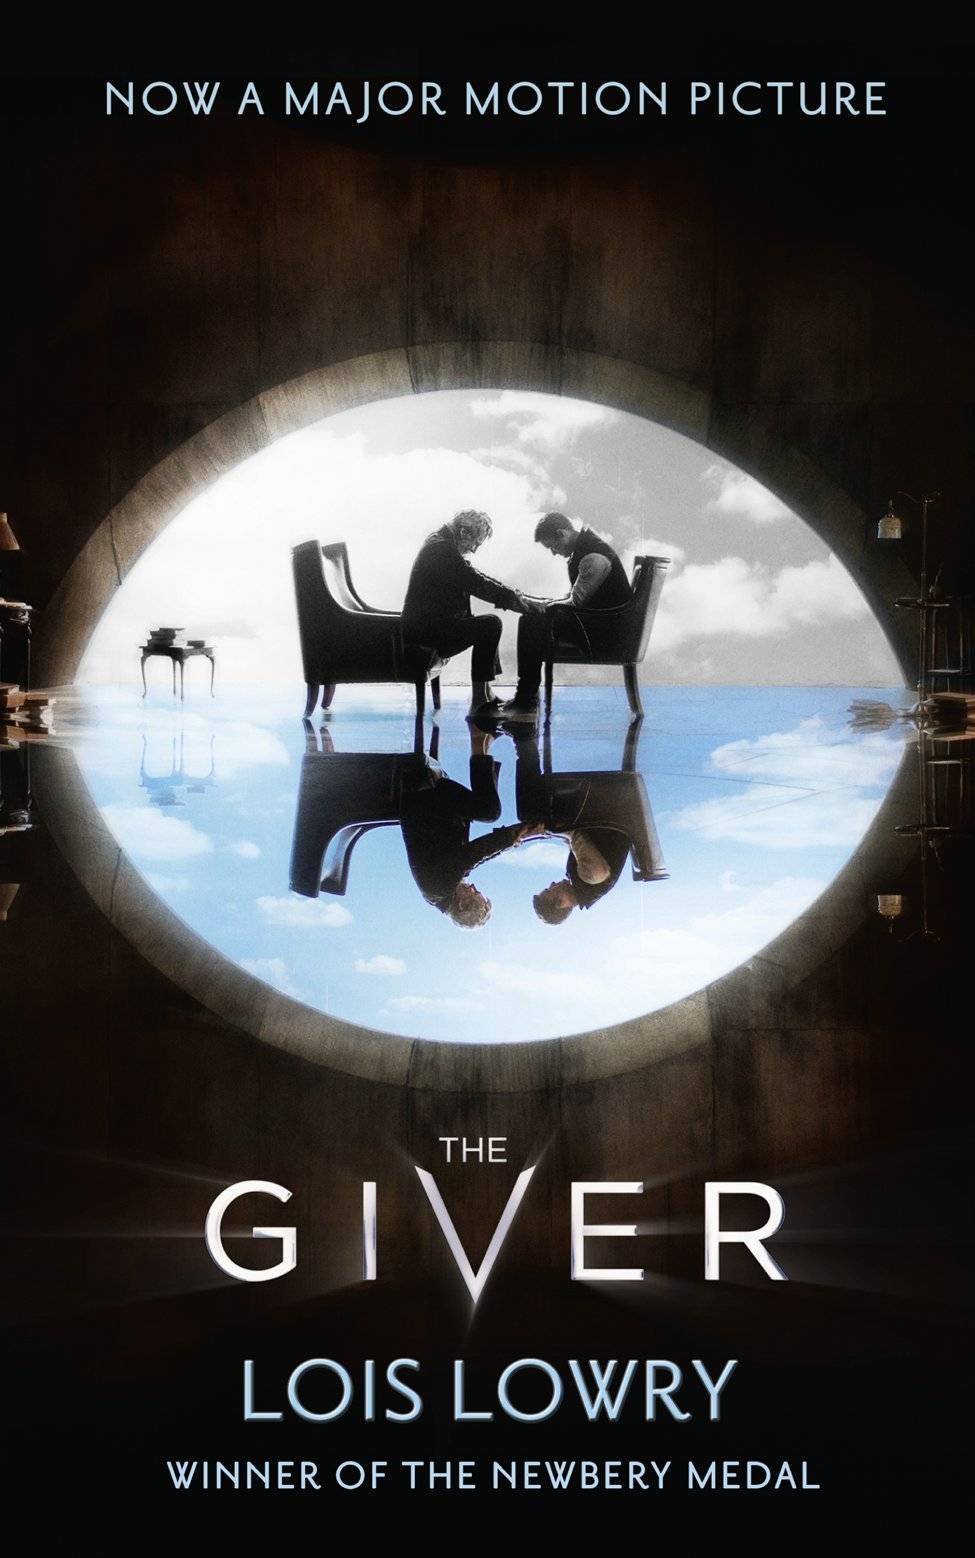 IMG : The Giver